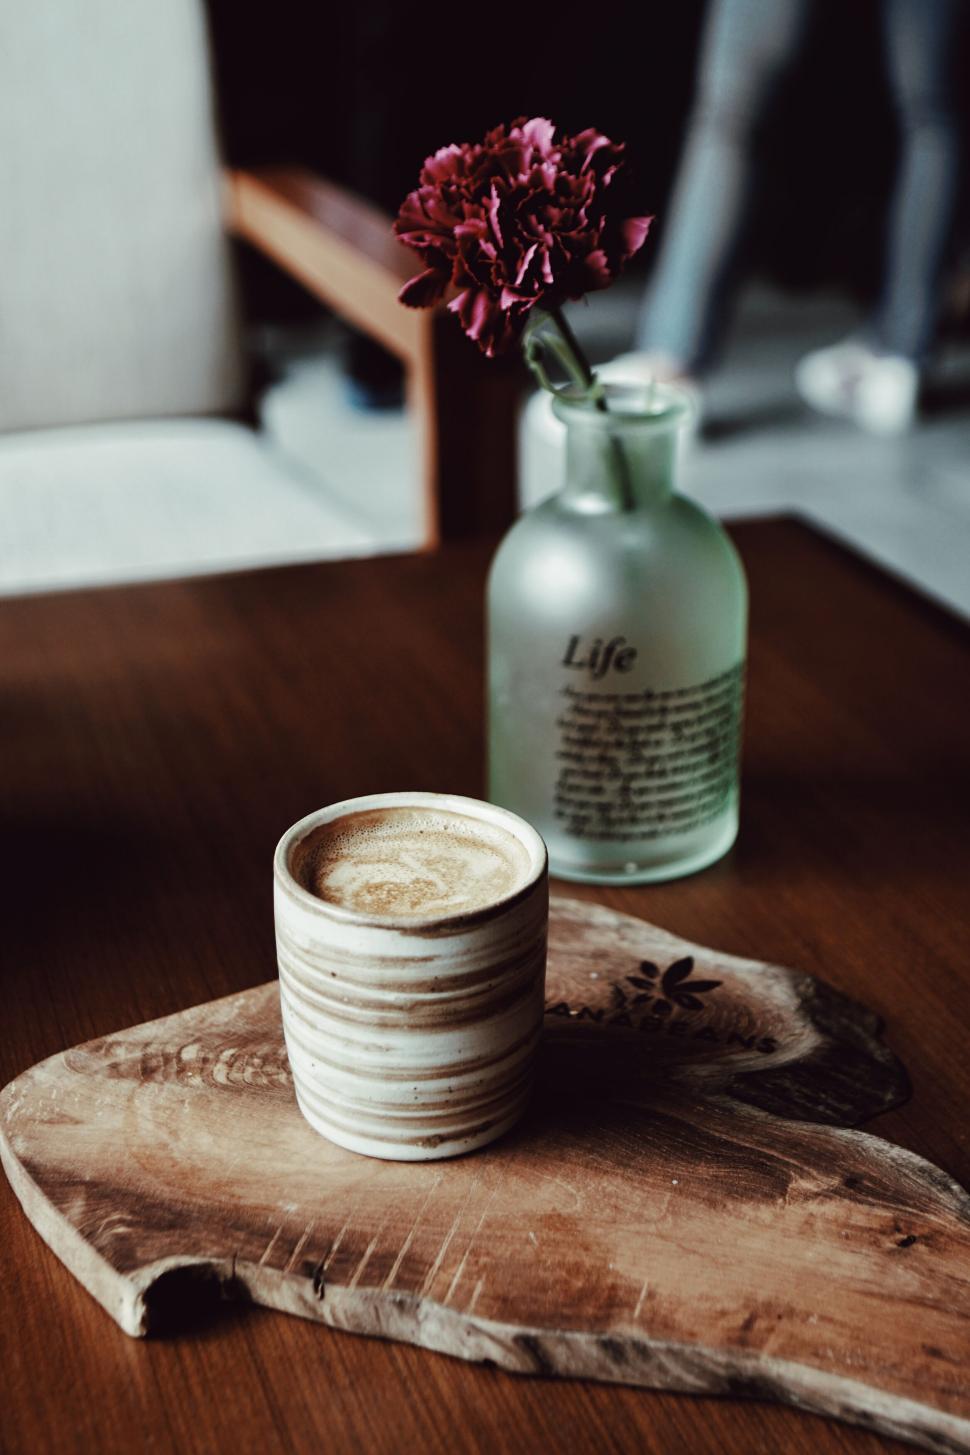 Free Image of A cup of coffee and a vase of flowers on a wood surface 